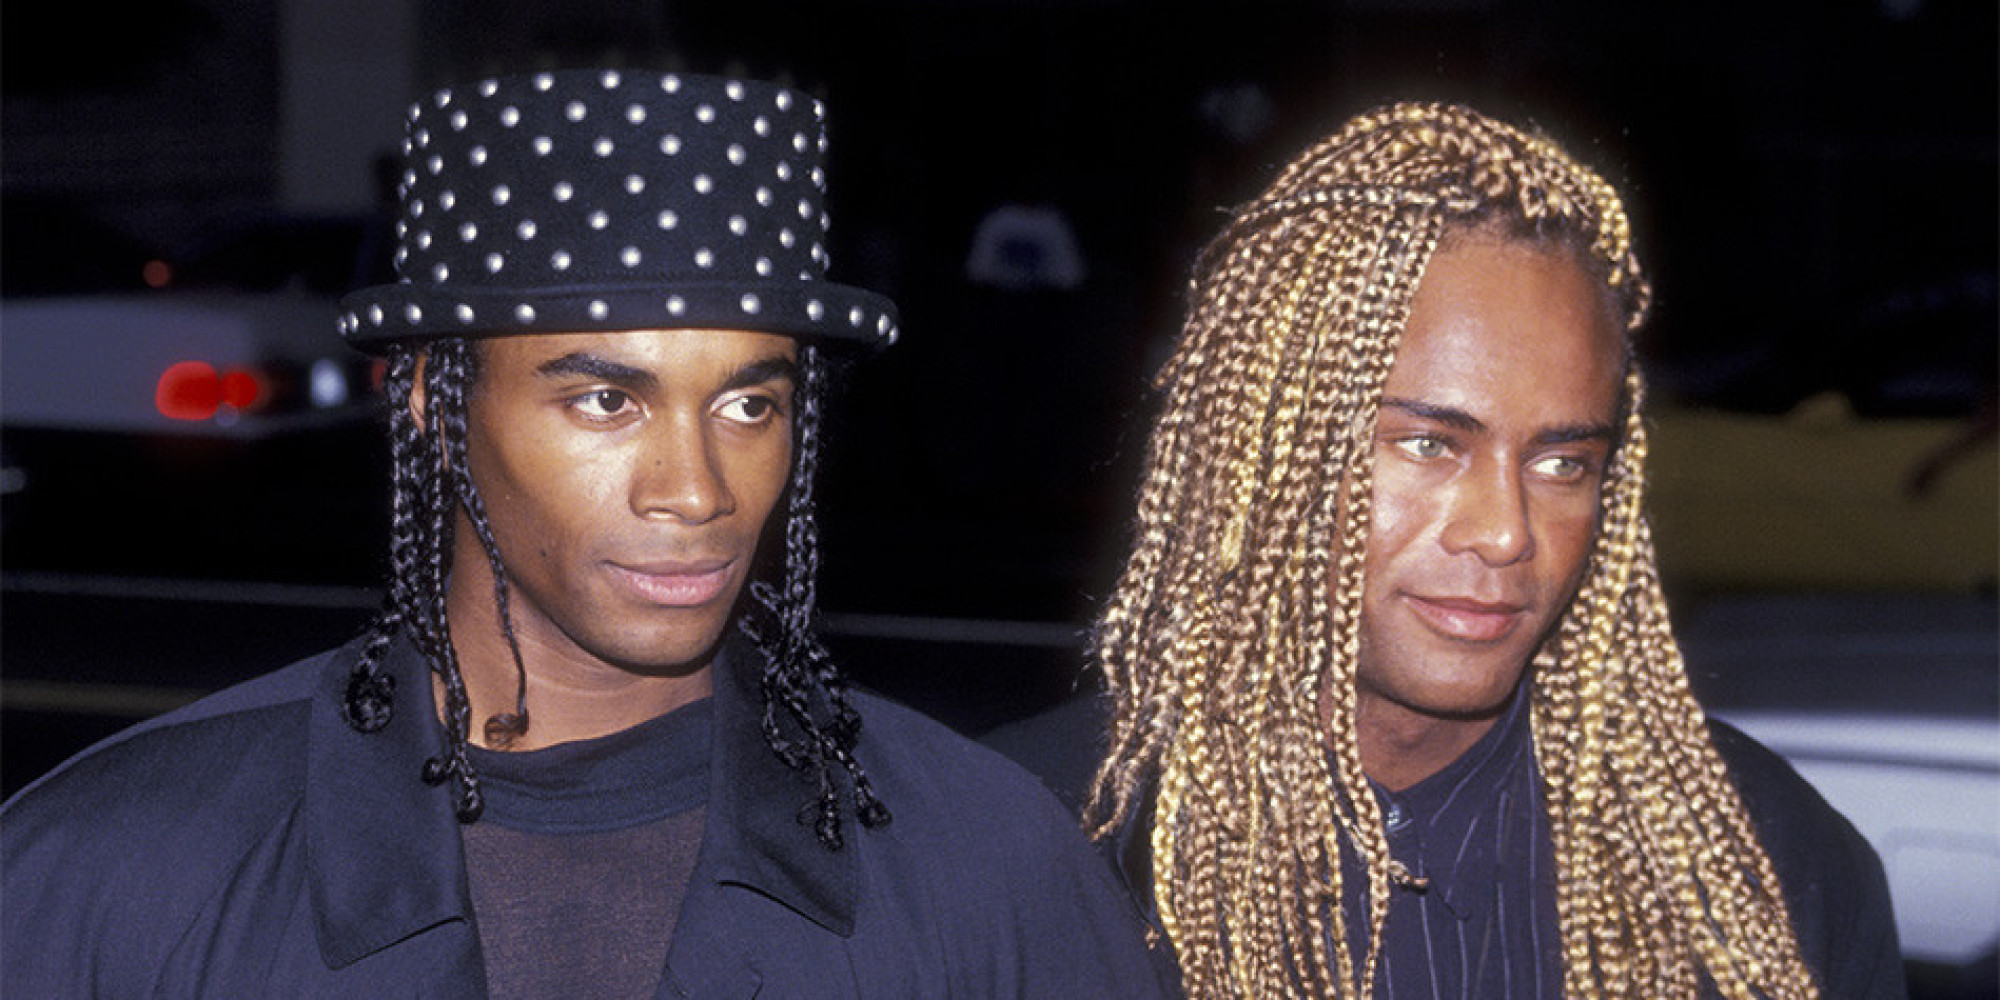 The Real Voices Behind Milli Vanilli Share Their Side Of The Lip